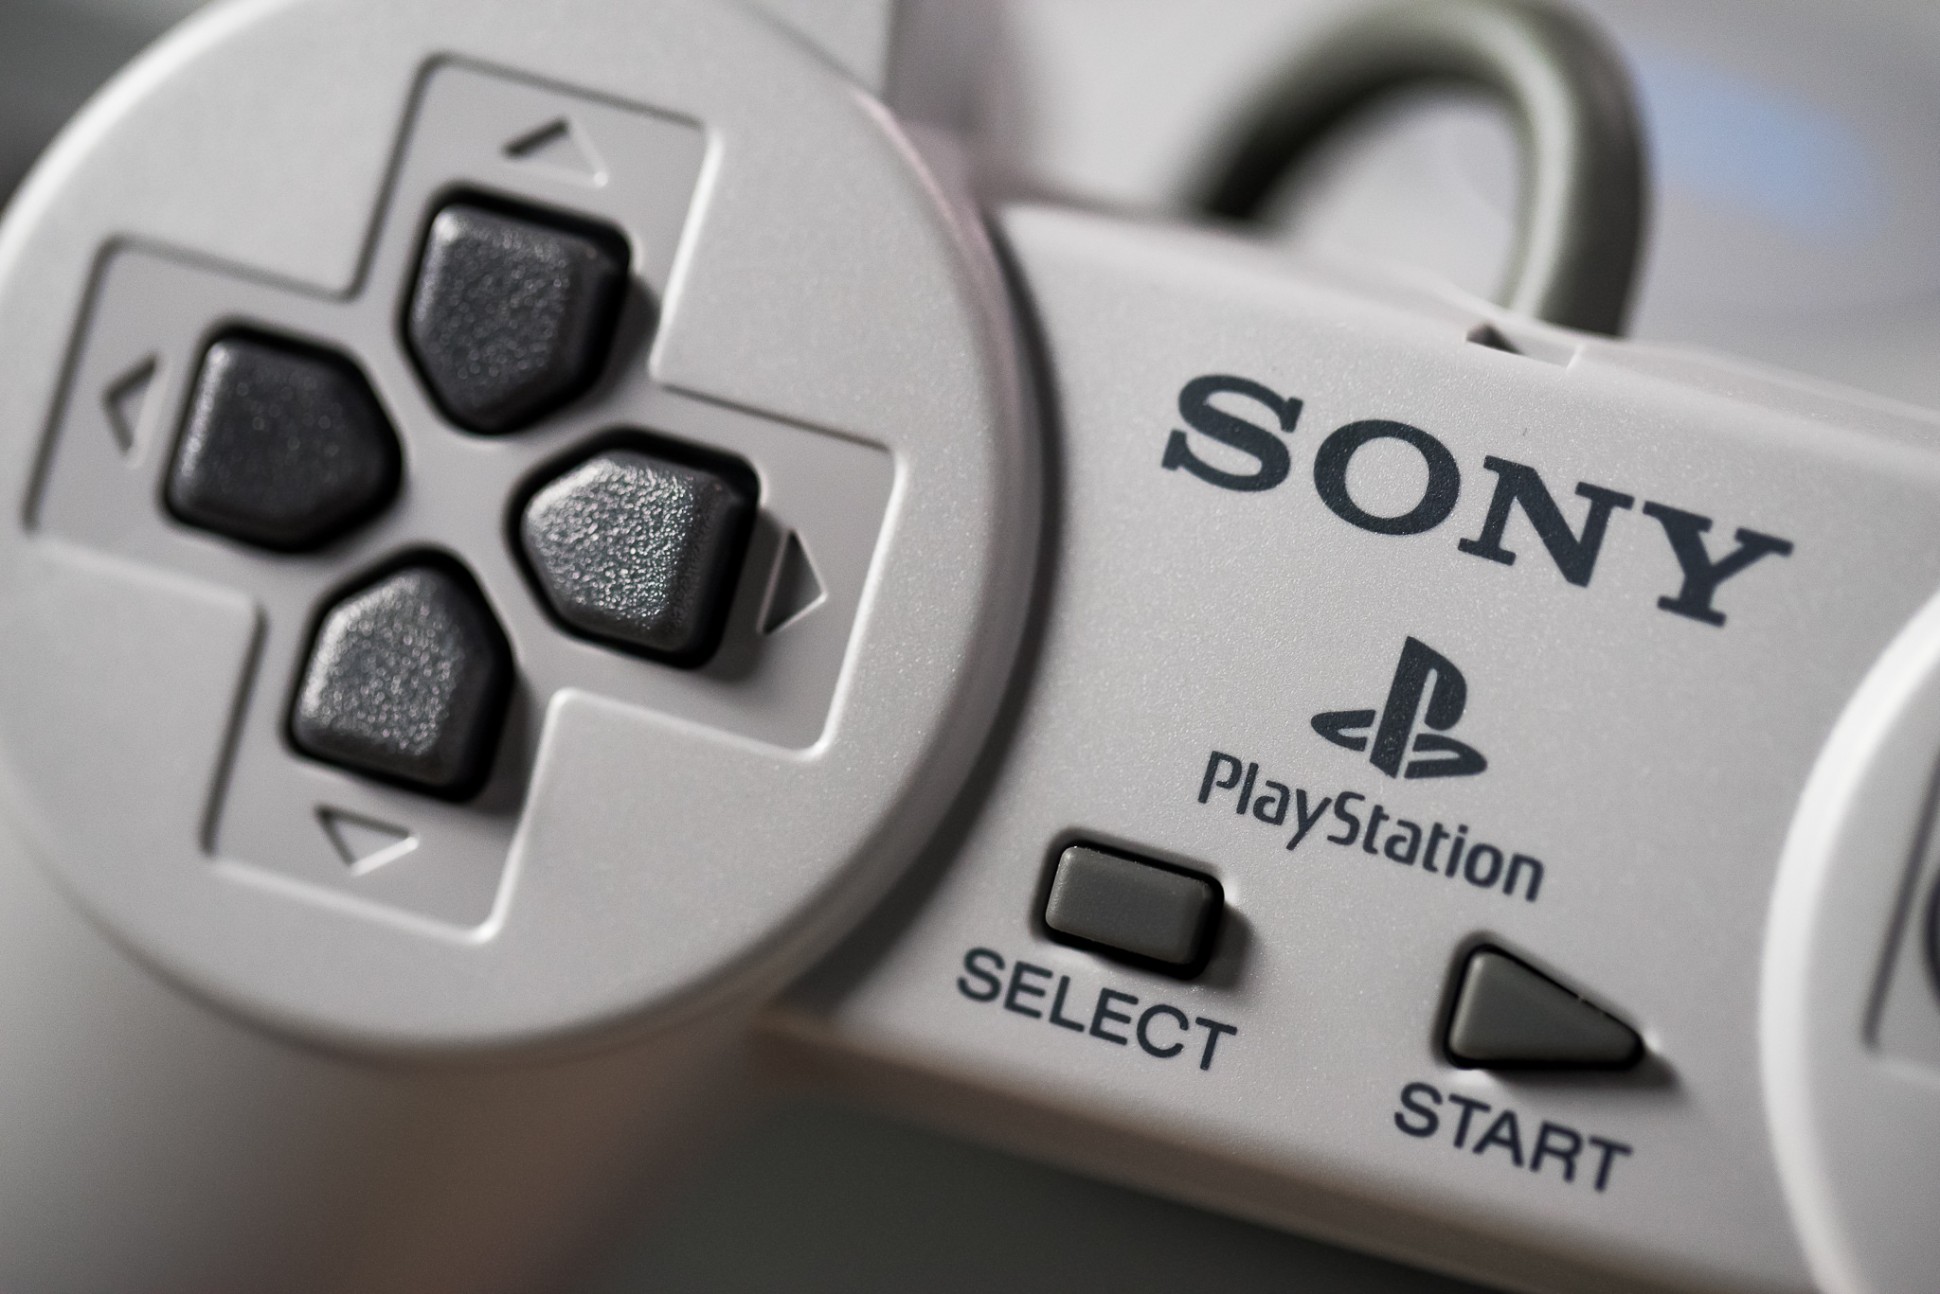 Sony's Playstation app hits 100 million installs five months after the launch of the PS5 ...